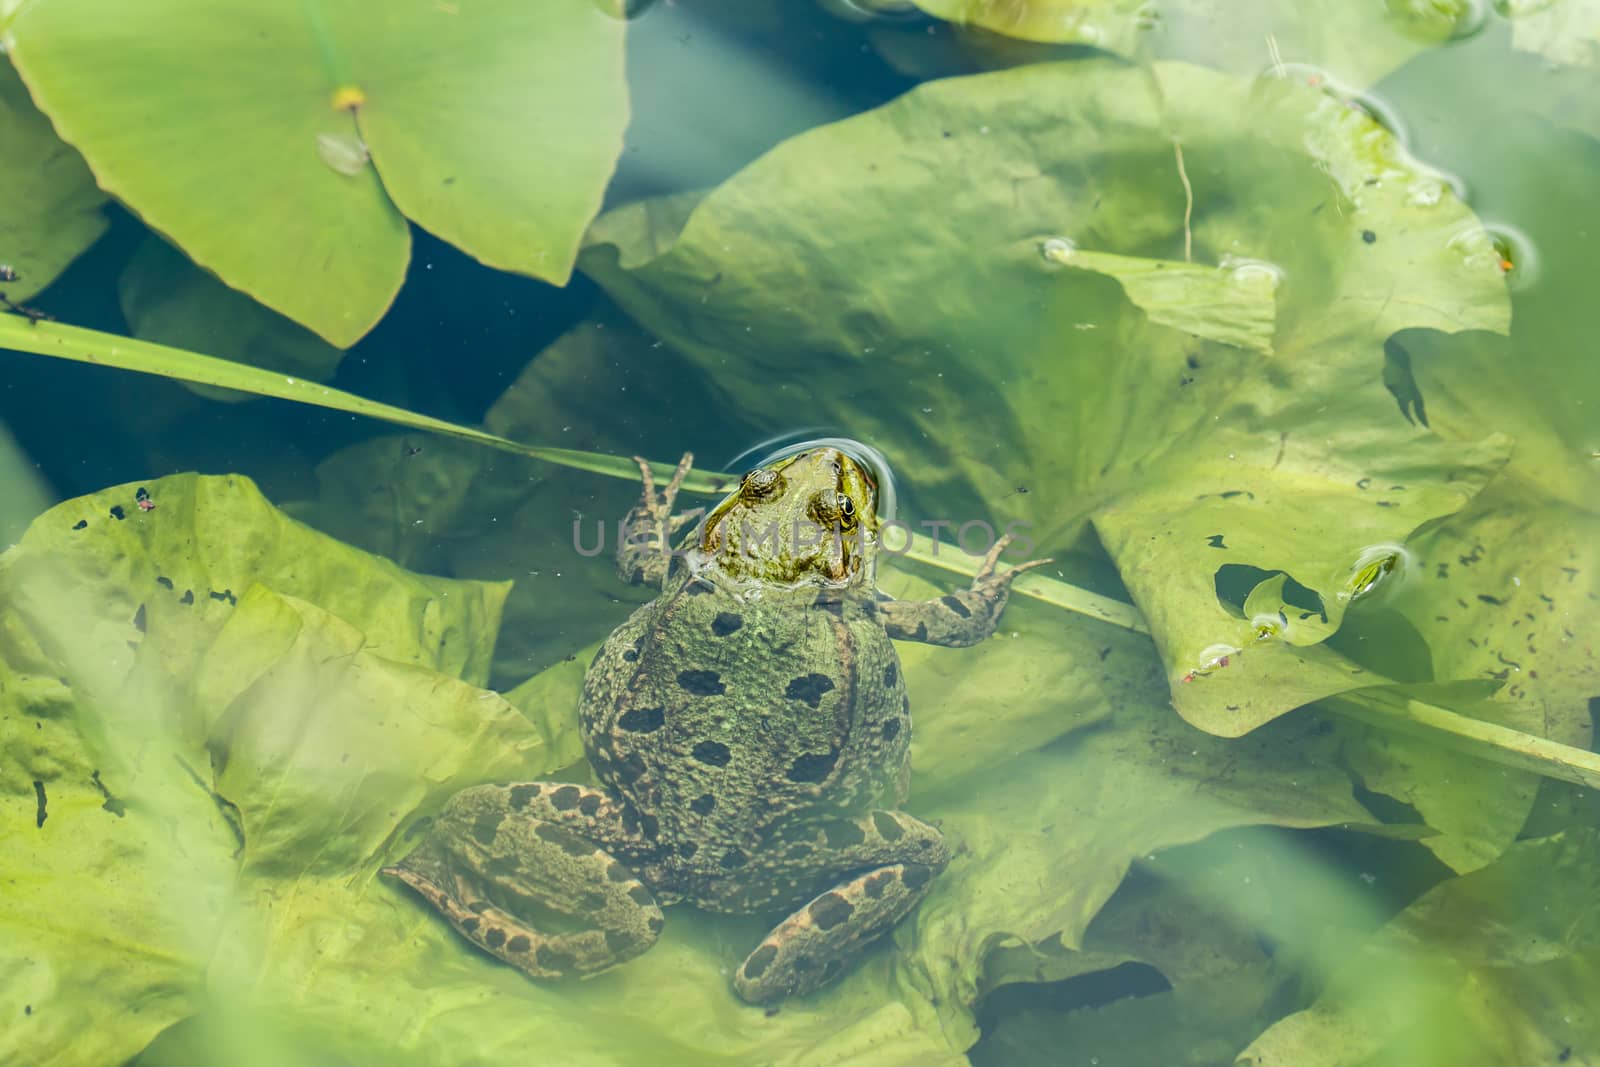 Introduced species Marsh Frog resting on lily pad in Sussex lake